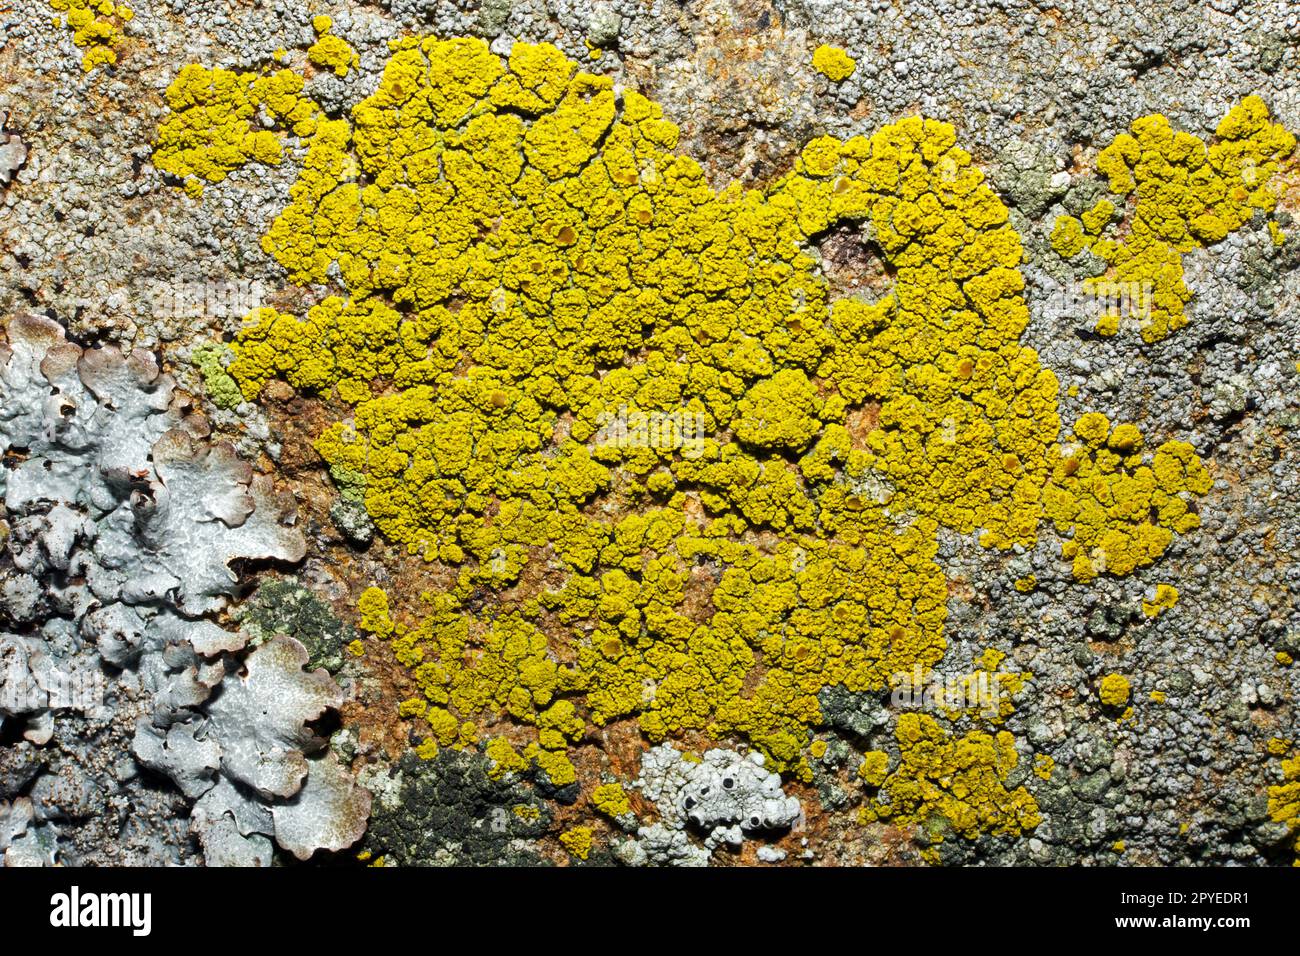 Candelariella coralliza is crustose lichen found on well-lit acidic rocks used as bird-perching sites. It has been found in both hemispheres. Stock Photo